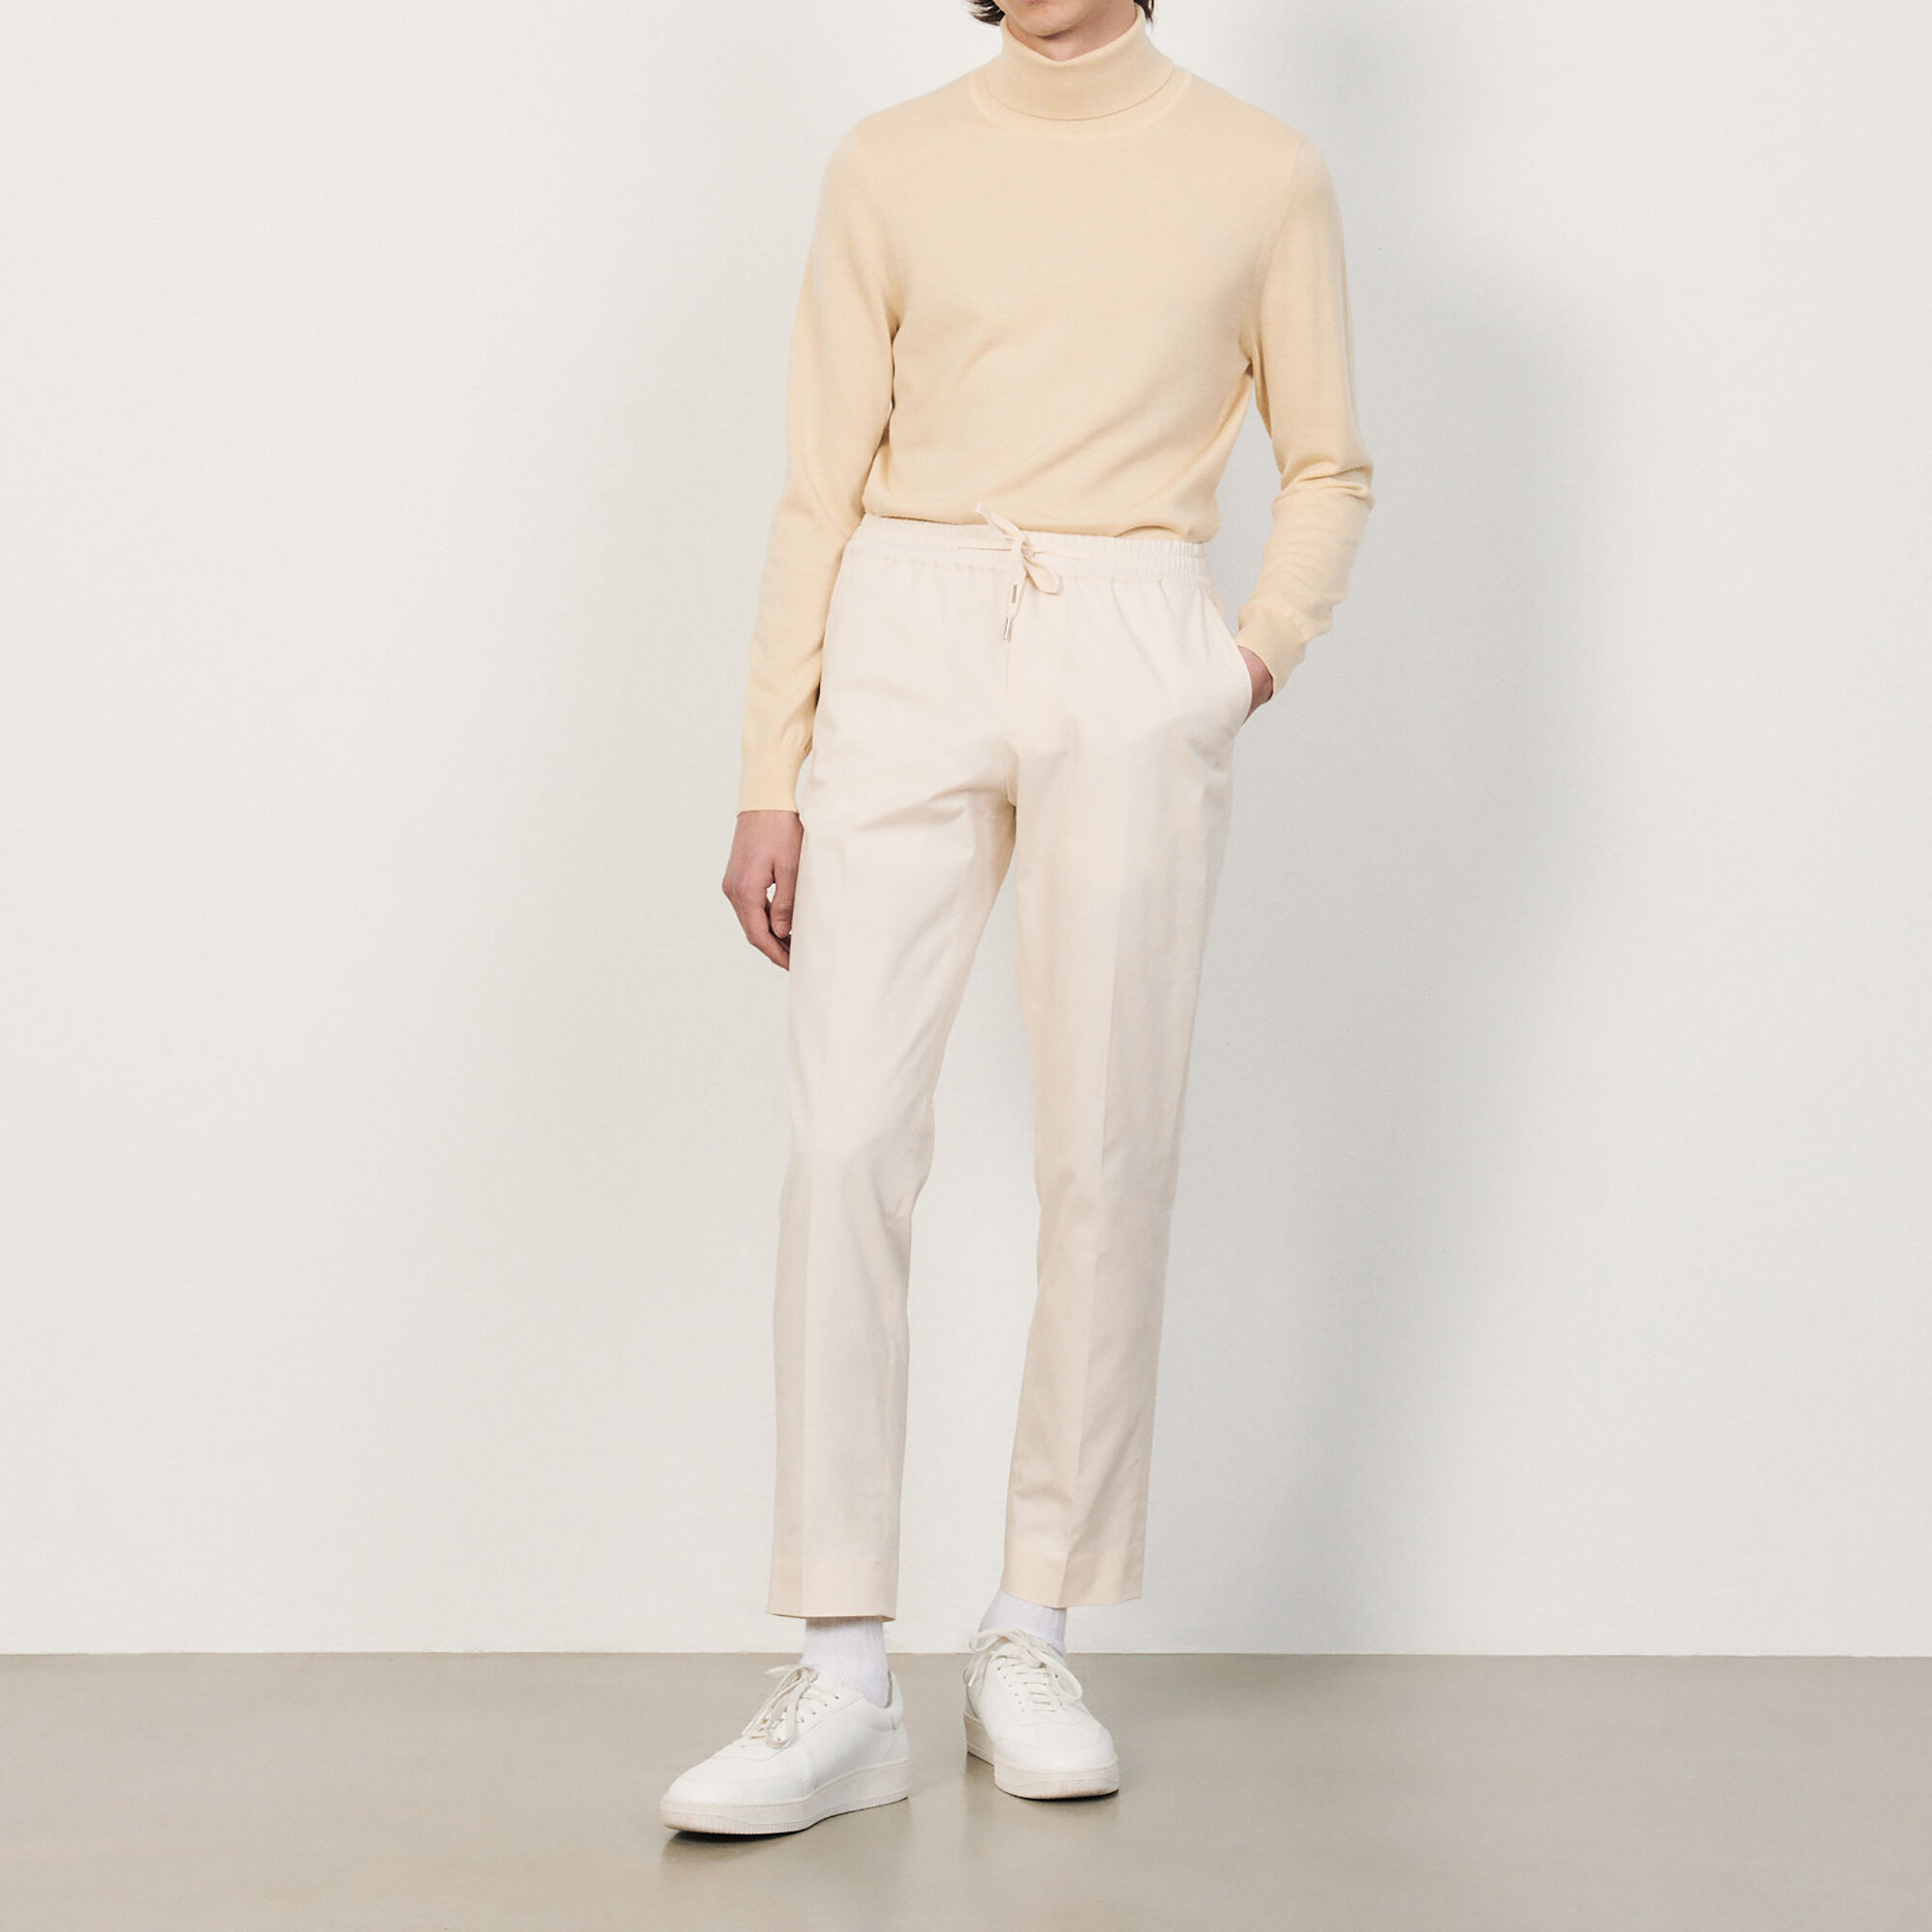 NWT. Zara Man Tan Relax Fit Pleated Carrot Fit Trousers. Size L. | Fitted  trousers, Zara man, Clothes design